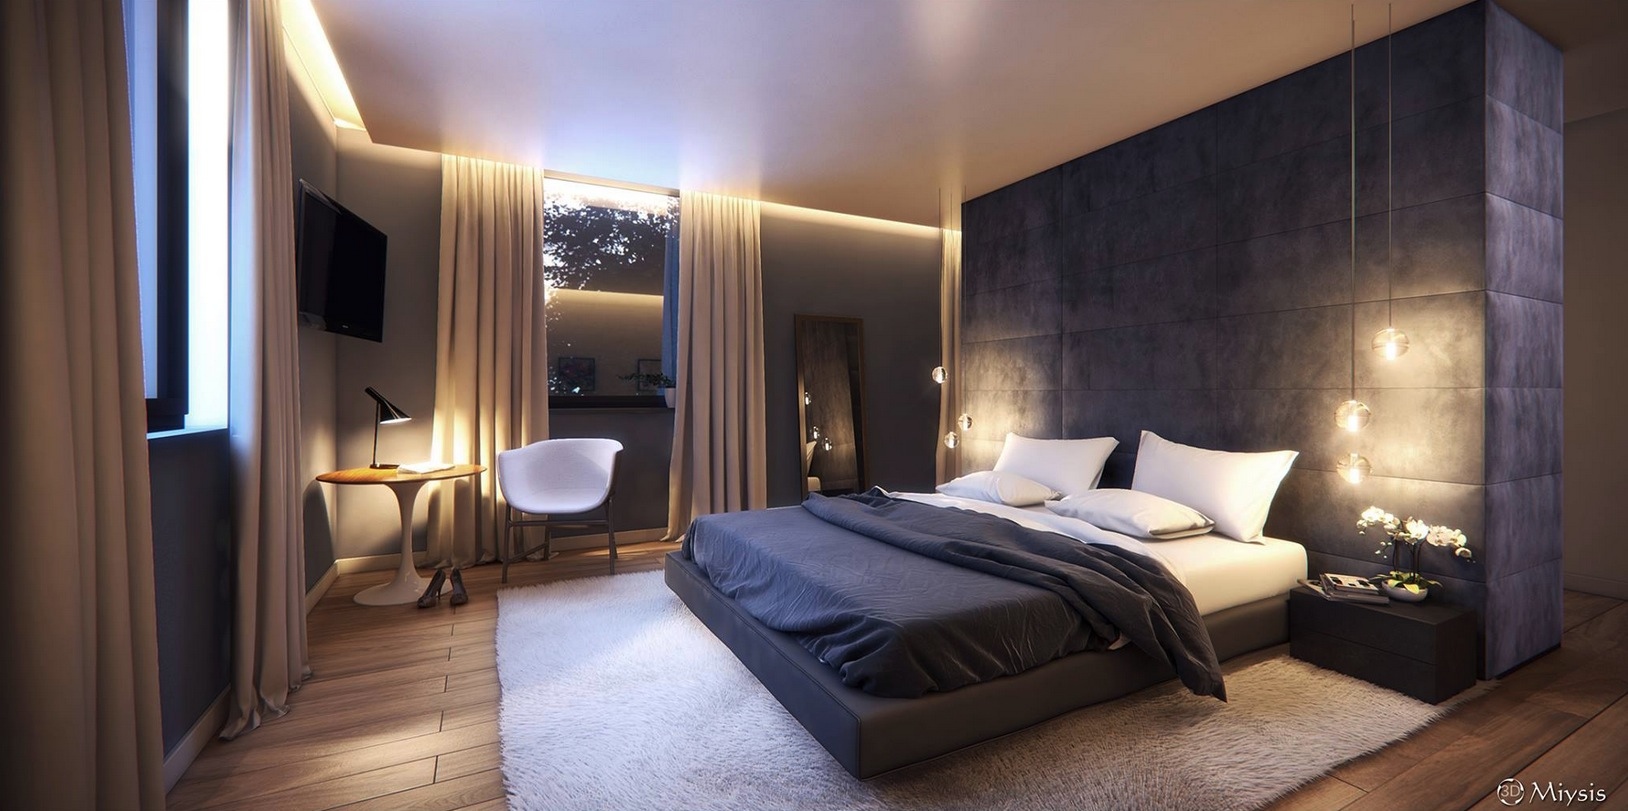 masculine bedroom design "width =" 1628 "height =" 811 "srcset =" https://mileray.com/wp-content/uploads/2020/05/1588507754_156_10-Top-Of-Minimalist-Bedroom-Ideas-Combined-With-Modern-and.jpeg 1628w, https://mileray.com/wp- content / uploads / 2016/10 / Miysis-300x149.jpeg 300w, https://mileray.com/wp-content/uploads/2016/10/Miysis-768x383.jpeg 768w, https://mileray.com/wp- content / uploads / 2016/10 / Miysis-1024x510.jpeg 1024w, https://mileray.com/wp-content/uploads/2016/10/Miysis-324x160.jpeg 324w, https://mileray.com/wp- content / uploads / 2016/10 / Miysis-696x347.jpeg 696w, https://mileray.com/wp-content/uploads/2016/10/Miysis-1068x532.jpeg 1068w, https://mileray.com/wp- content / Uploads / 2016/10 / Miysis-843x420.jpeg 843w "sizes =" (maximum width: 1628px) 100vw, 1628px